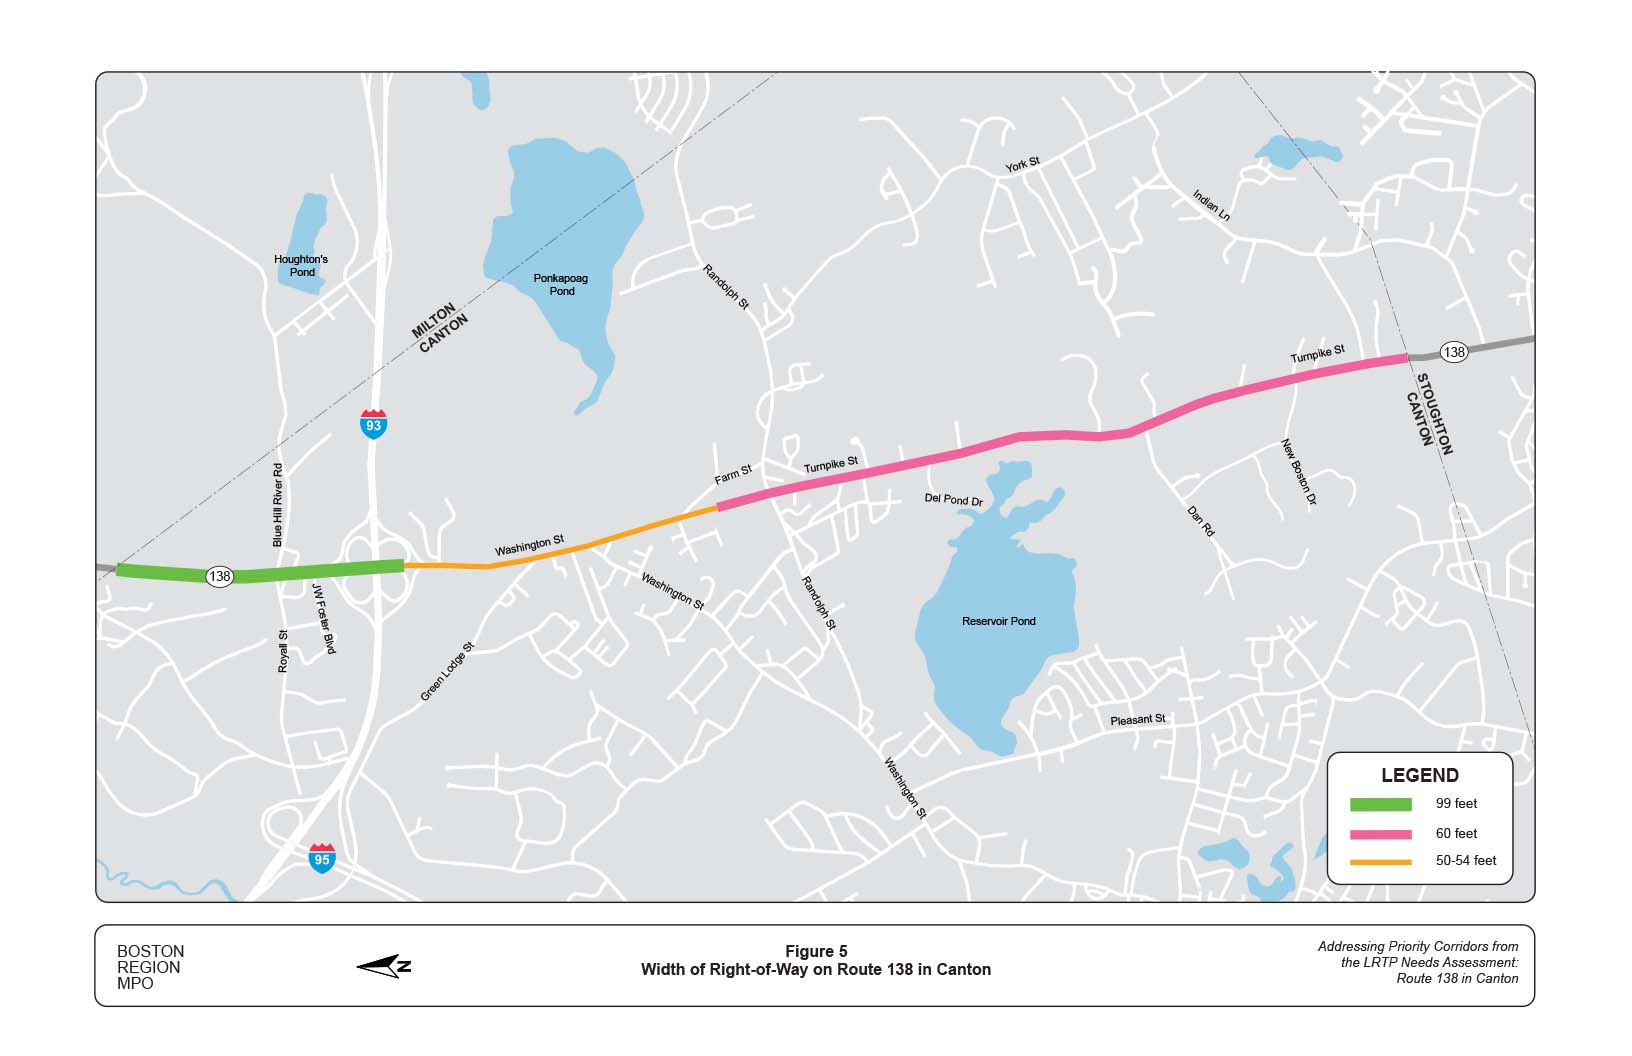 Figure 5 is a map of the study area showing the width of the right-of-way Route 138.